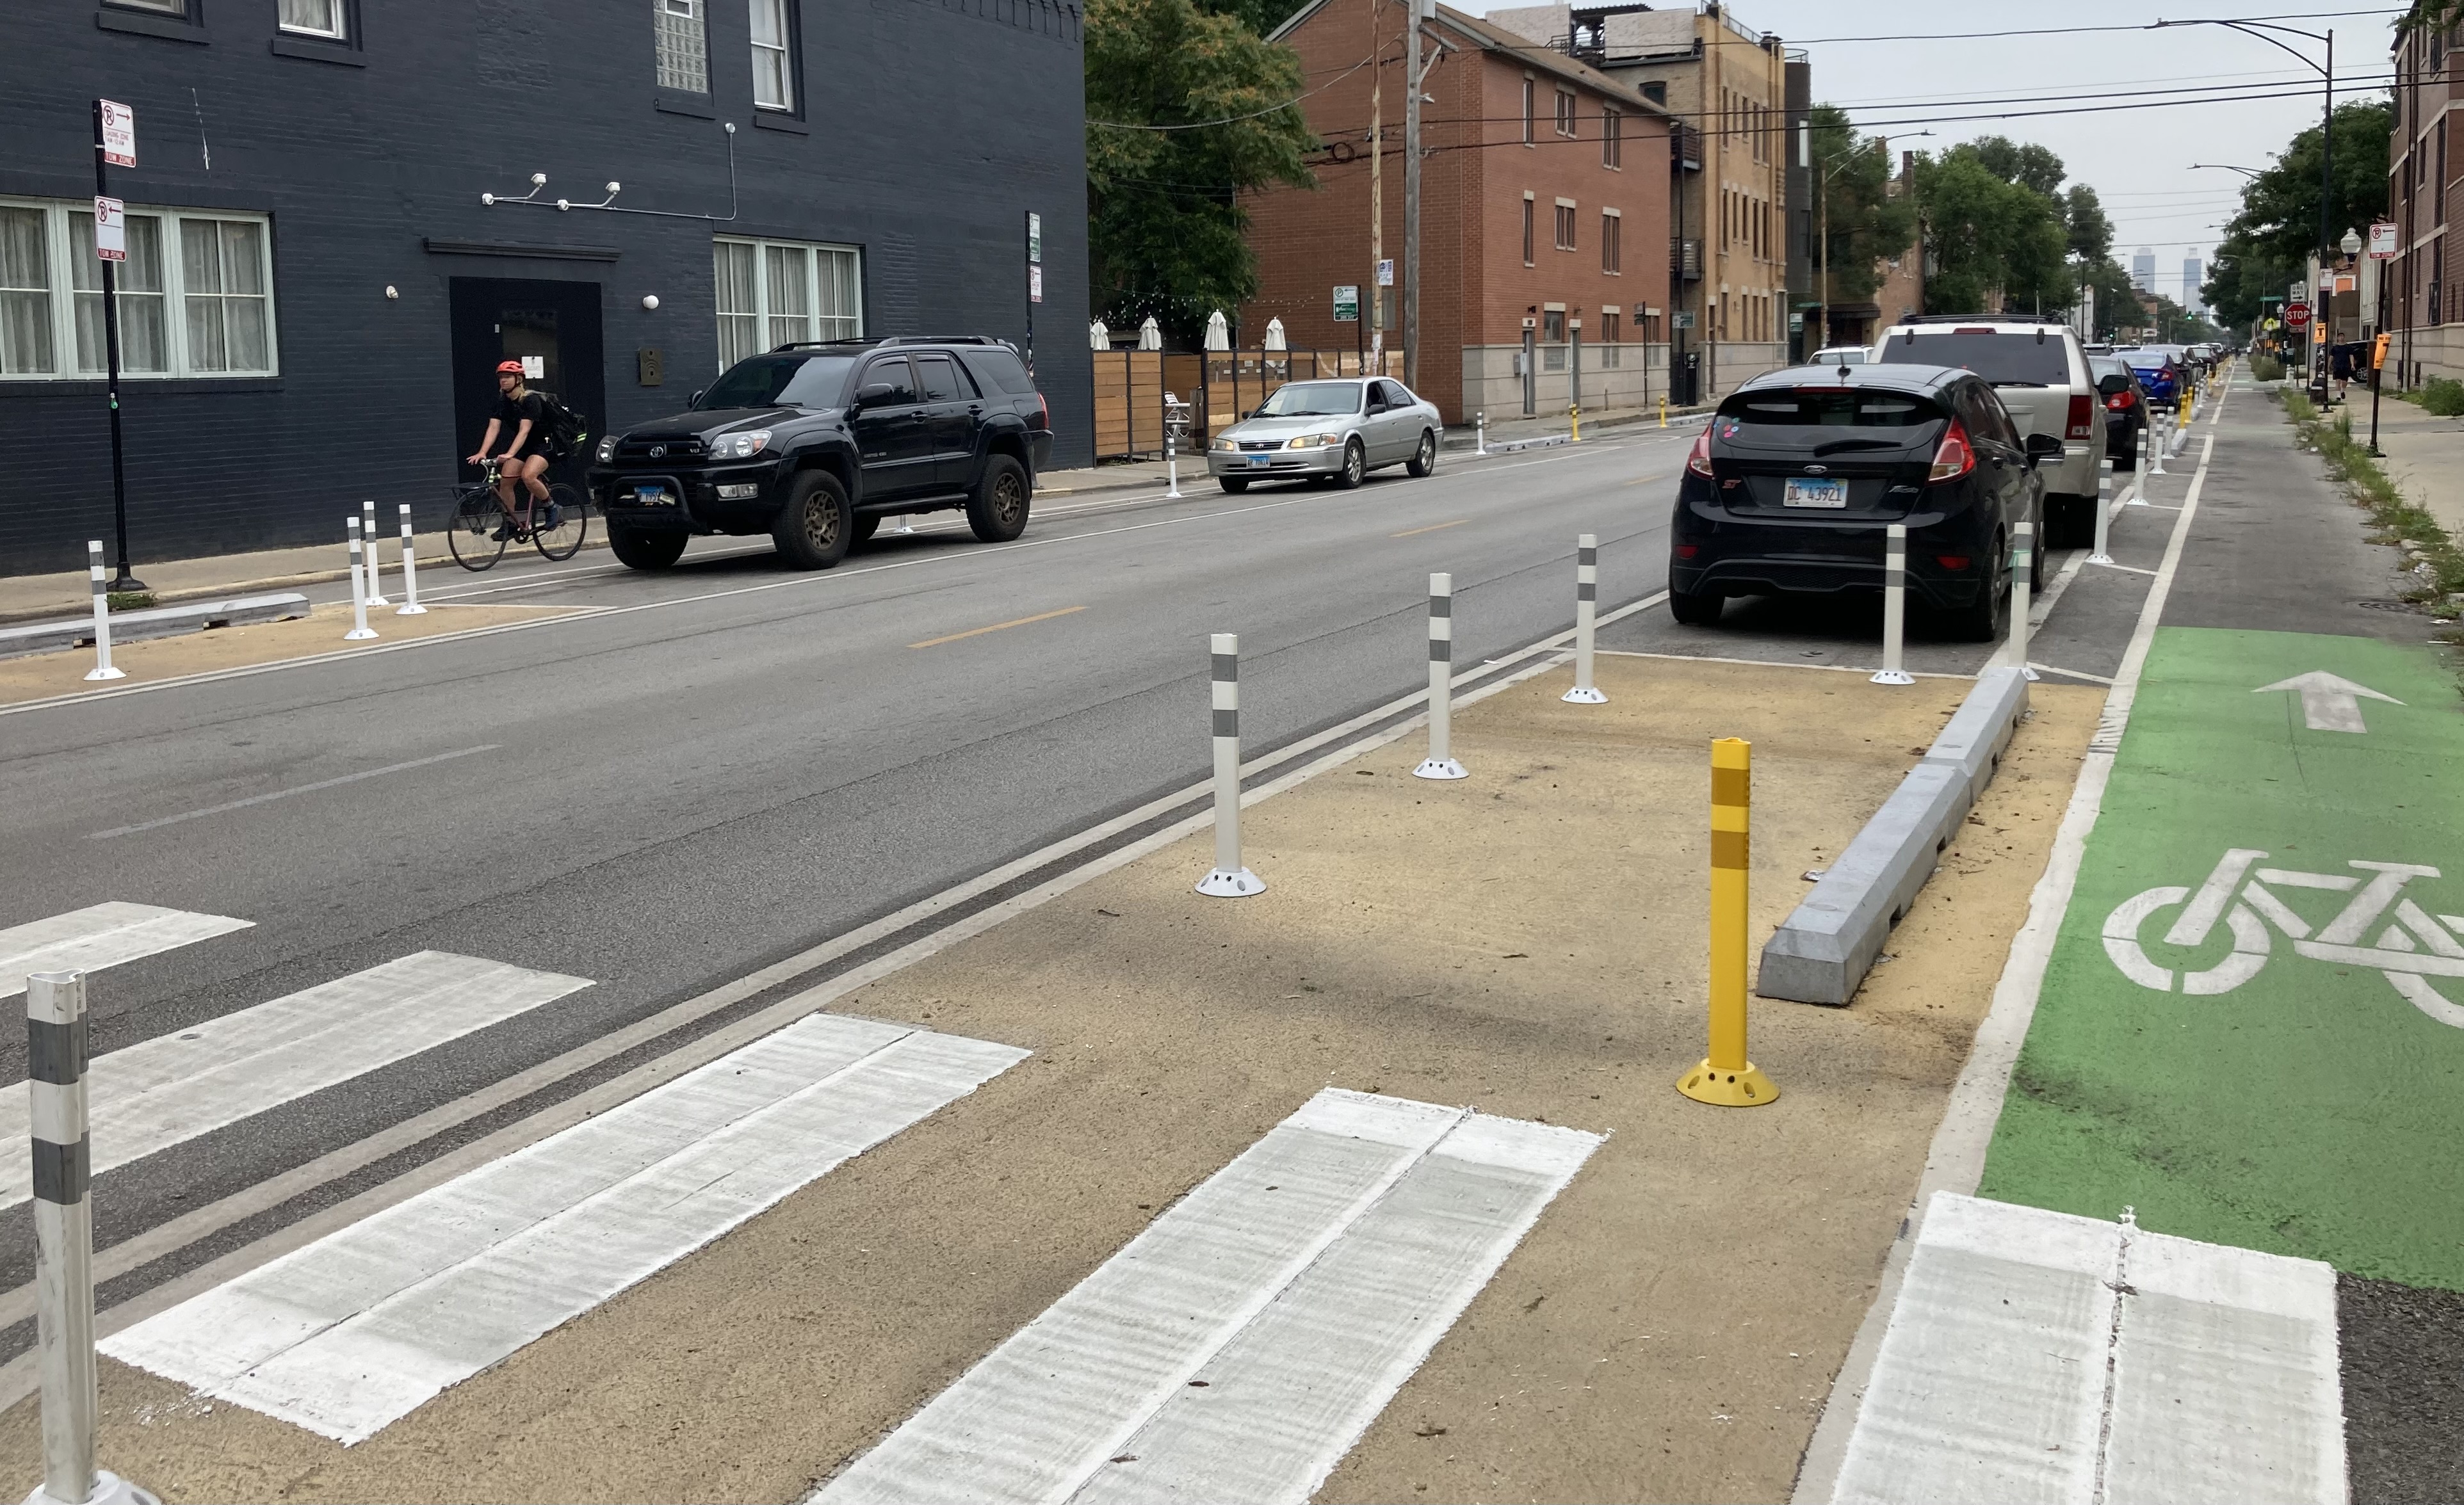 Will driver complaints lead to ‘design changes’ for Augusta’s protected bike lanes?